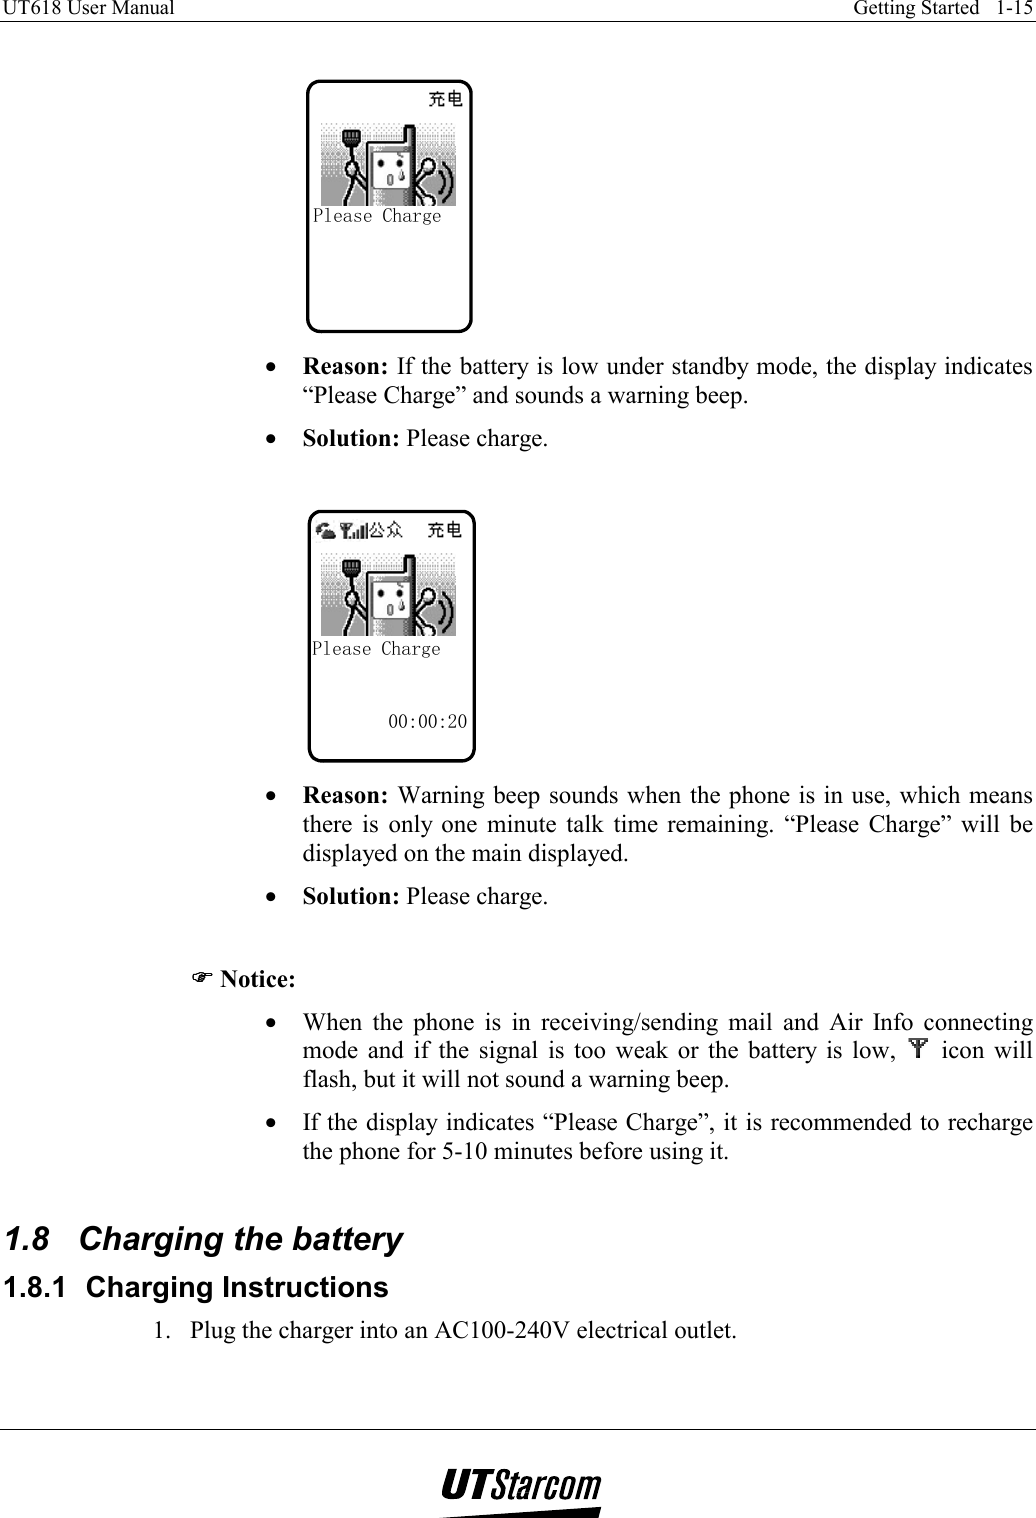 UT618 User Manual    Getting Started   1-15    Please Charge •  Reason: If the battery is low under standby mode, the display indicates “Please Charge” and sounds a warning beep. •  Solution: Please charge.  Please Charge00:00:20 •  Reason: Warning beep sounds when the phone is in use, which means there is only one minute talk time remaining. “Please Charge” will be displayed on the main displayed. •  Solution: Please charge.  )))) Notice: •  When the phone is in receiving/sending mail and Air Info connecting mode and if the signal is too weak or the battery is low,   icon will flash, but it will not sound a warning beep. •  If the display indicates “Please Charge”, it is recommended to recharge the phone for 5-10 minutes before using it.   1.8  Charging the battery 1.8.1  Charging Instructions 1.  Plug the charger into an AC100-240V electrical outlet. 